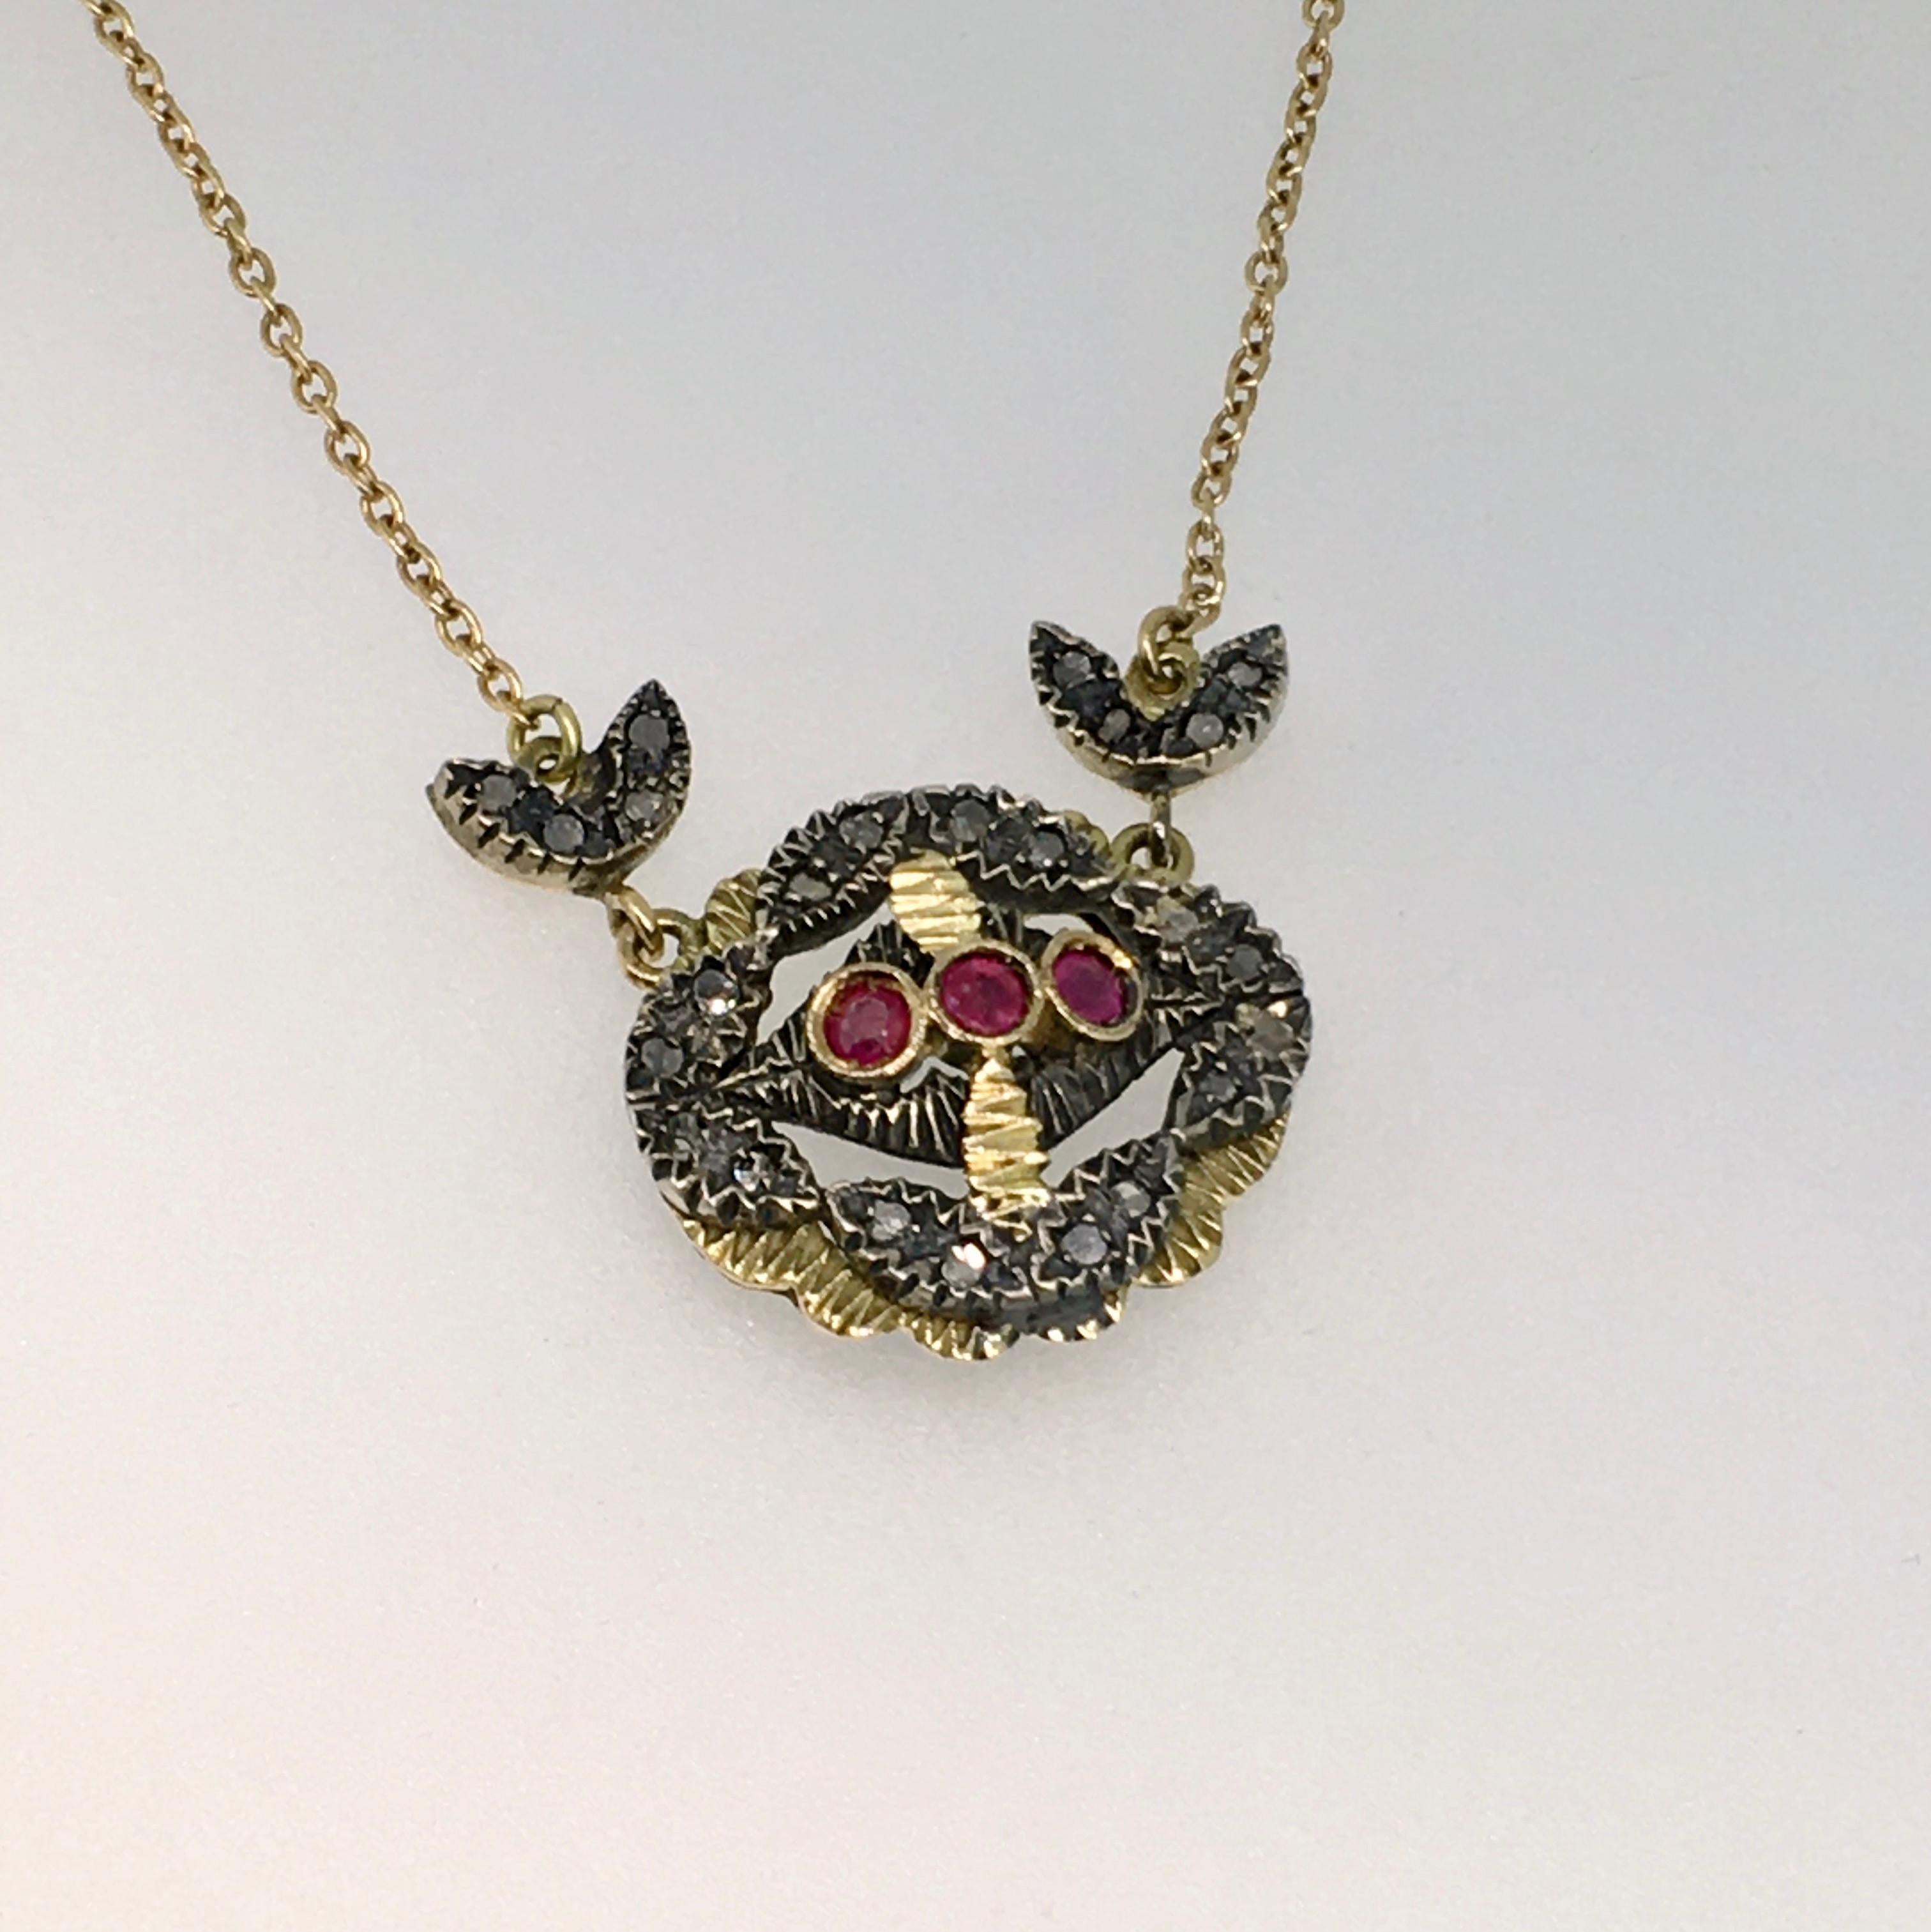 Pendant Necklace, Gold, Silver, Diamond, Ruby, Antique For Sale 3